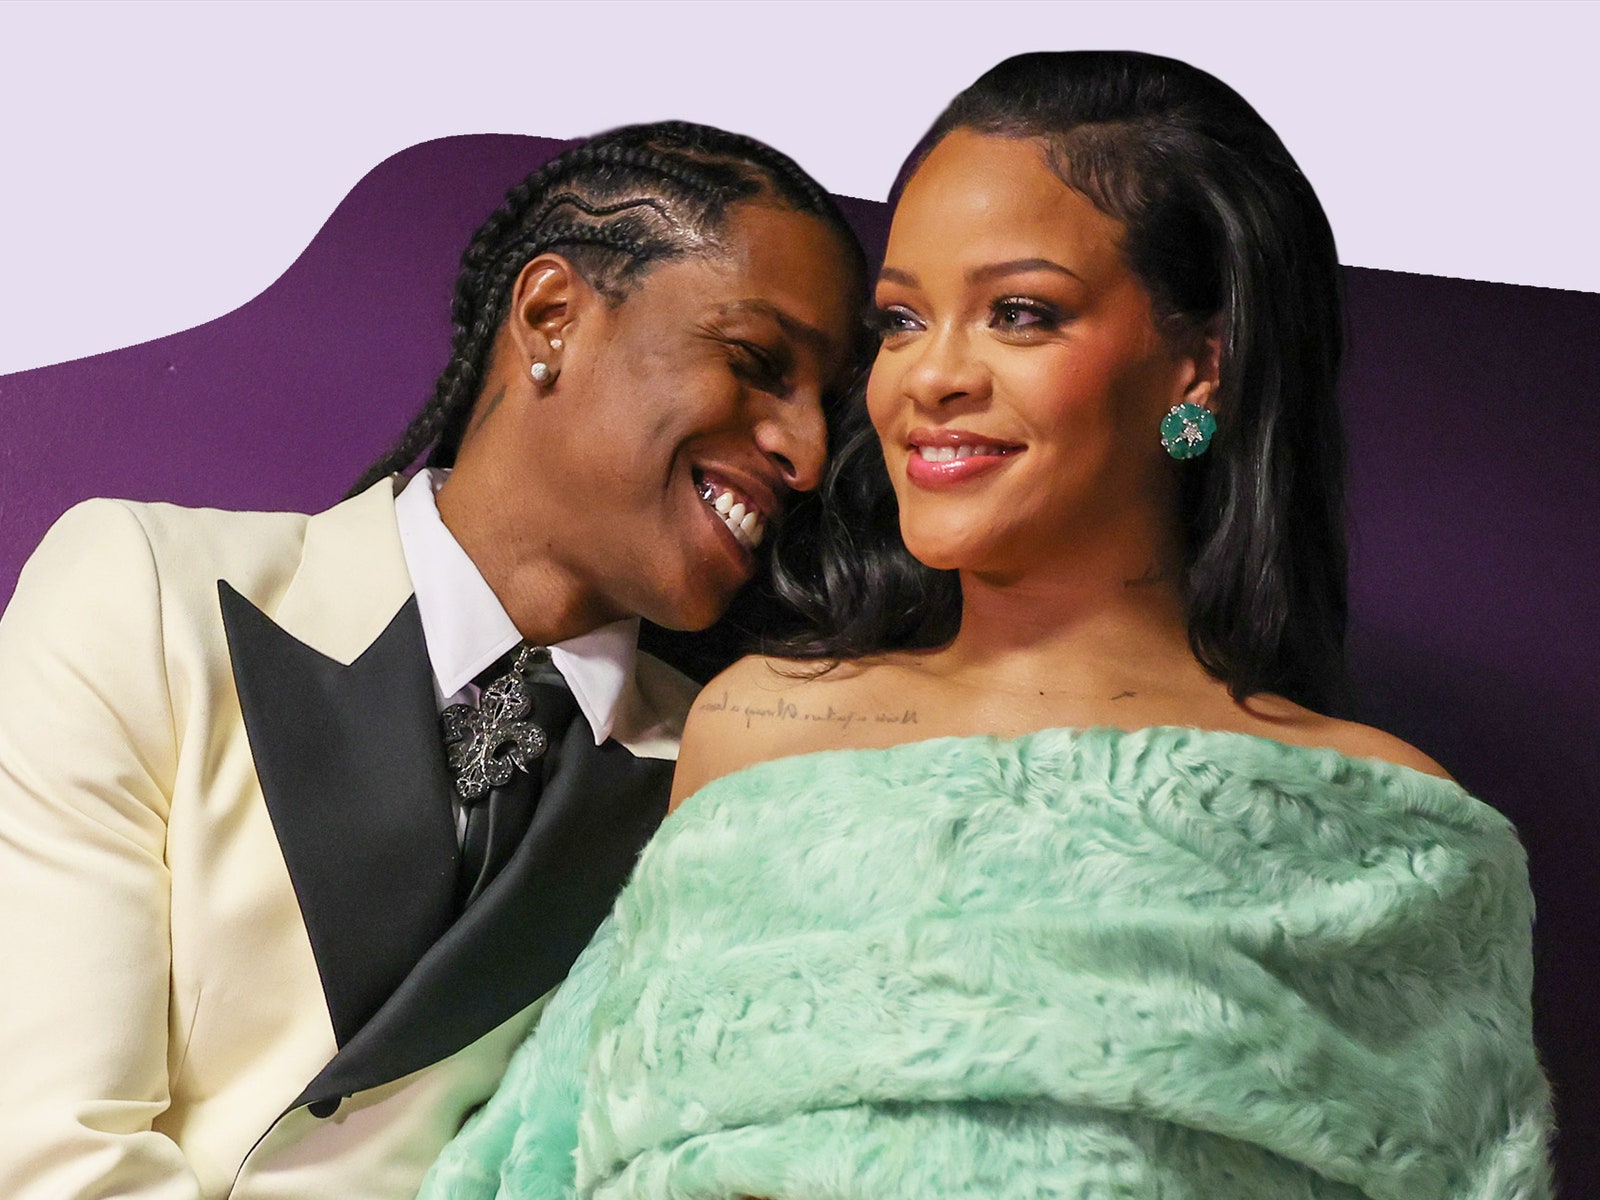 Rihanna and ASAP Rocky finally revealed the unique baby name of their second child